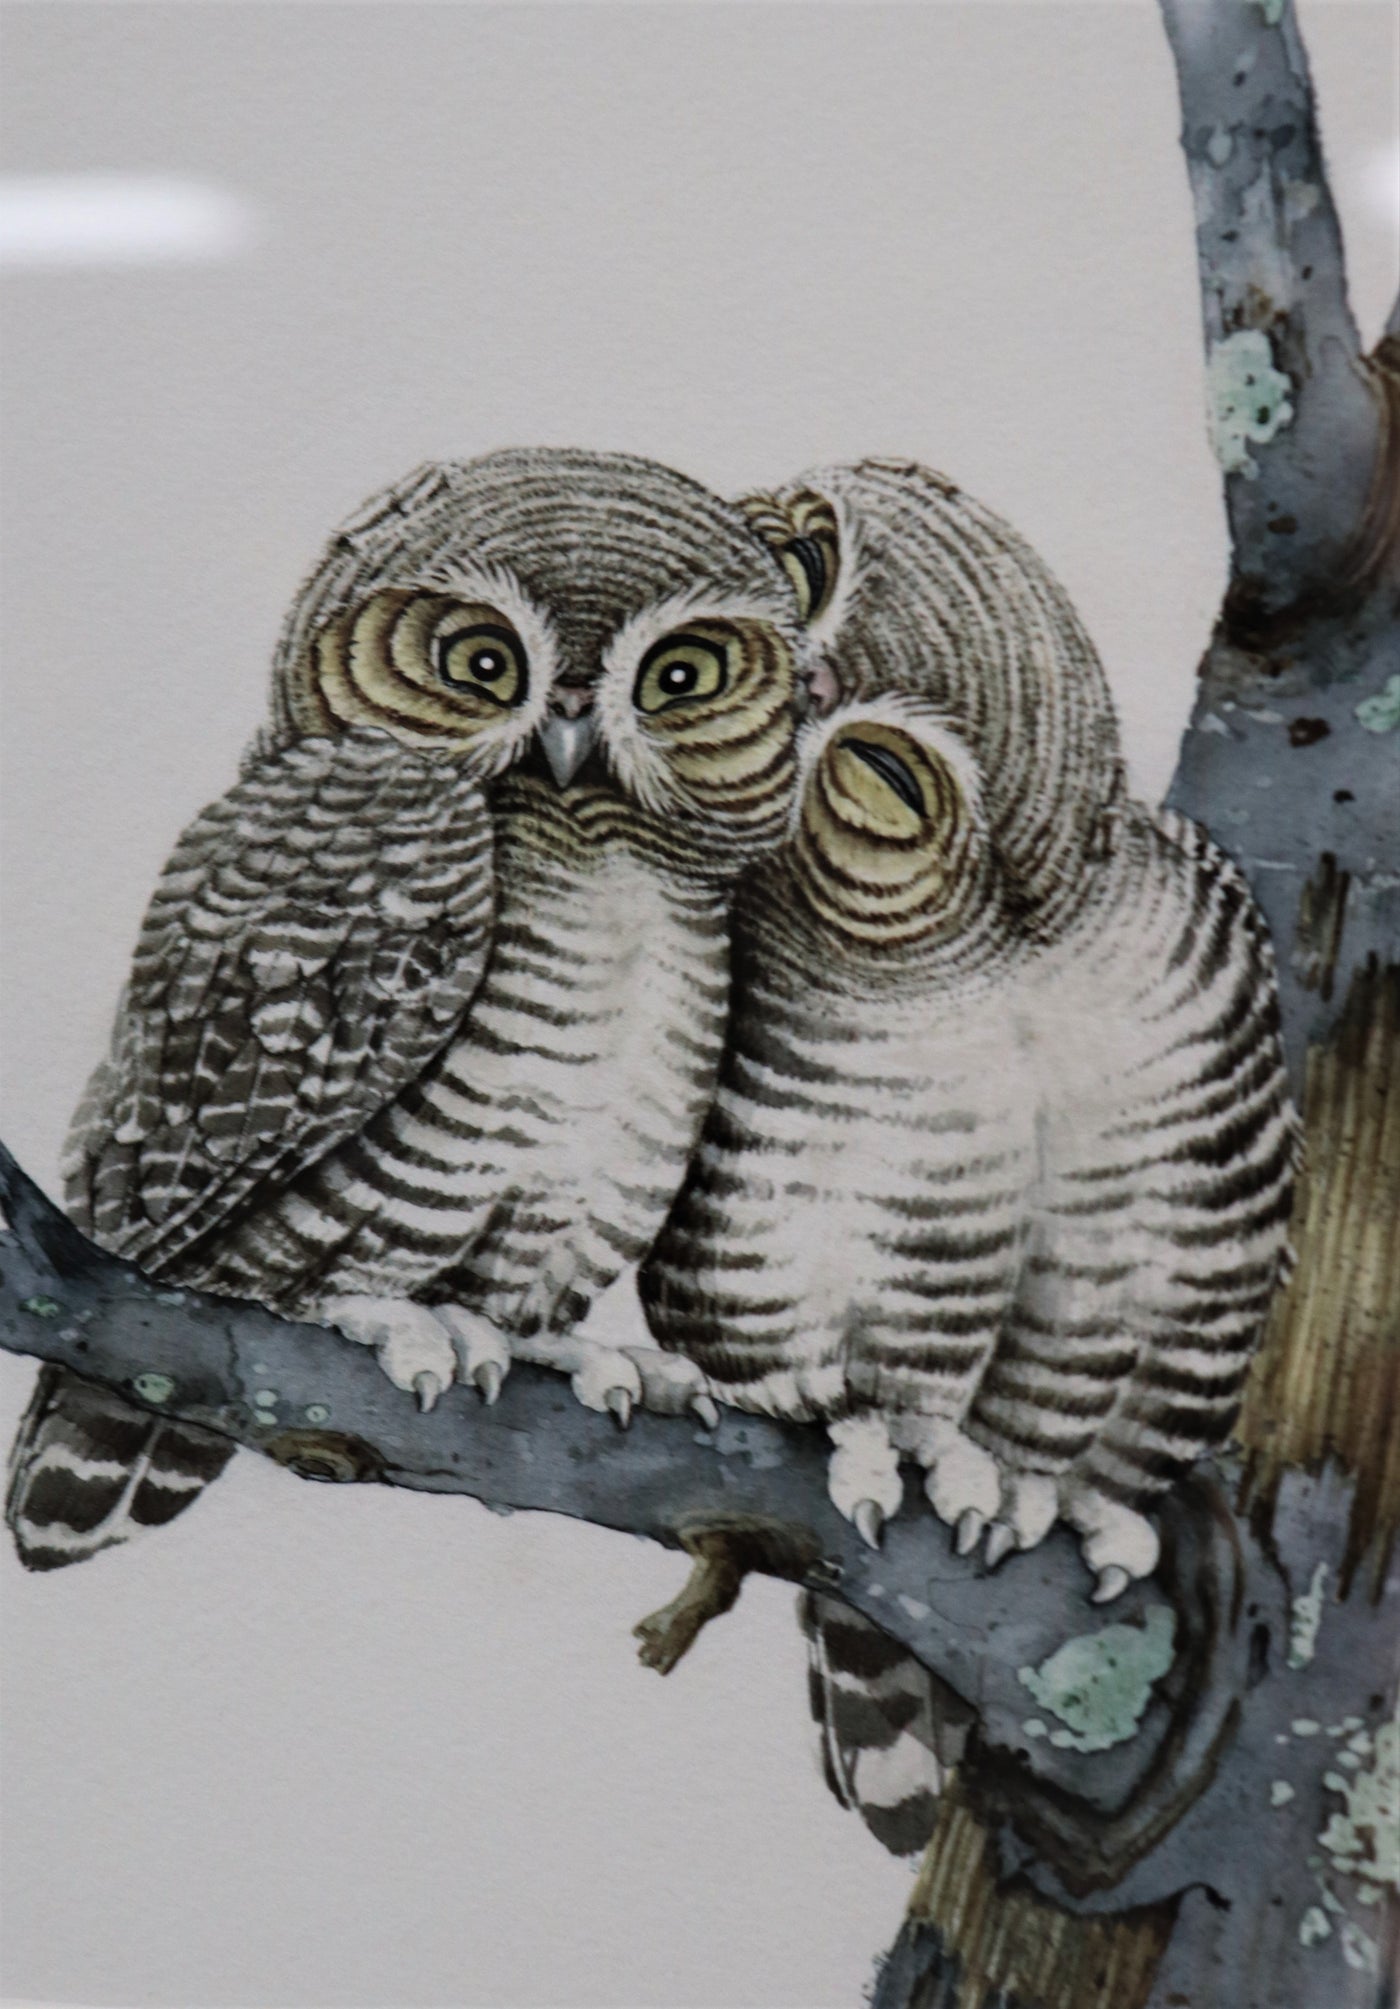 Cuddling Owls- Giclee Watercolor Painting